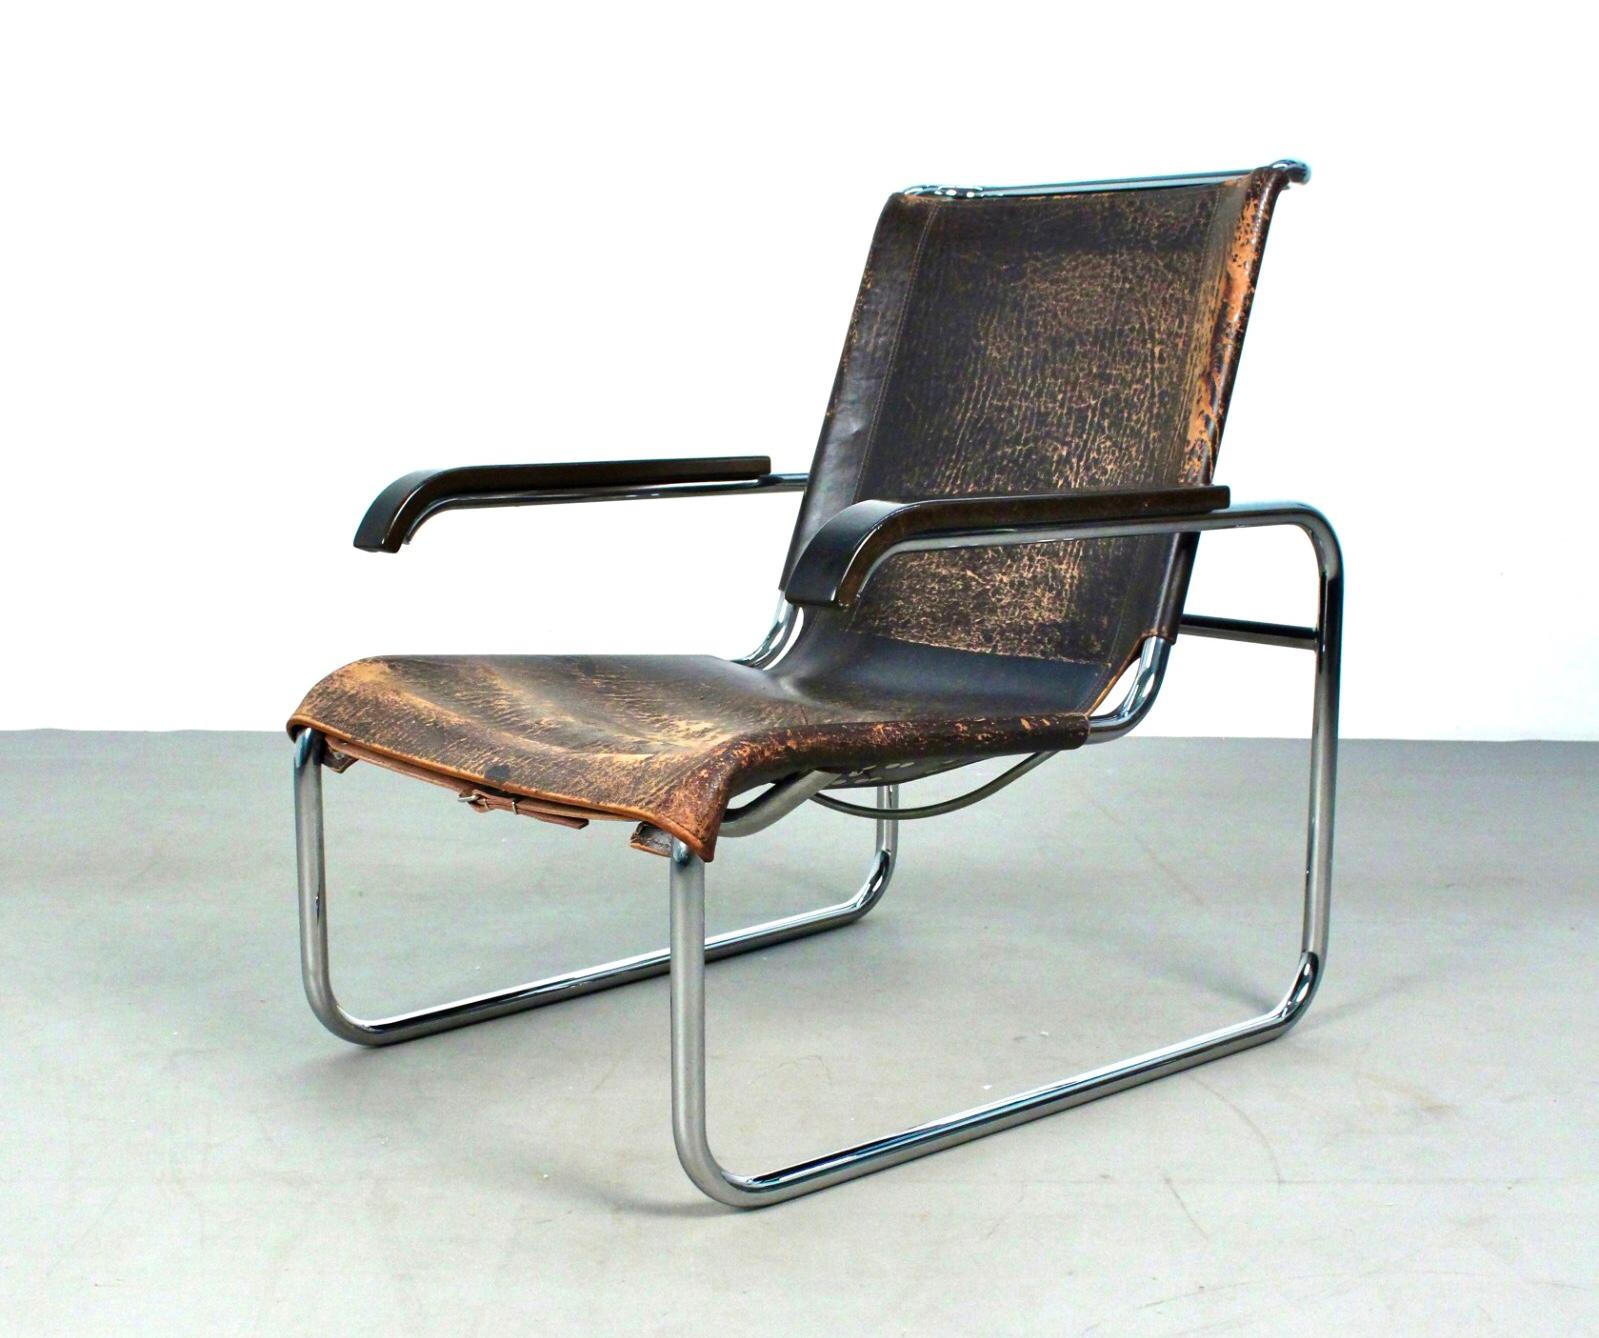 Early B35 lounge chair designed by Marcel Breuer in 1928 and manufactured by Thonet (marked in the frame and in the leather seat). Made in tubular steel and upholstered in its original leather with its great vintage patina.